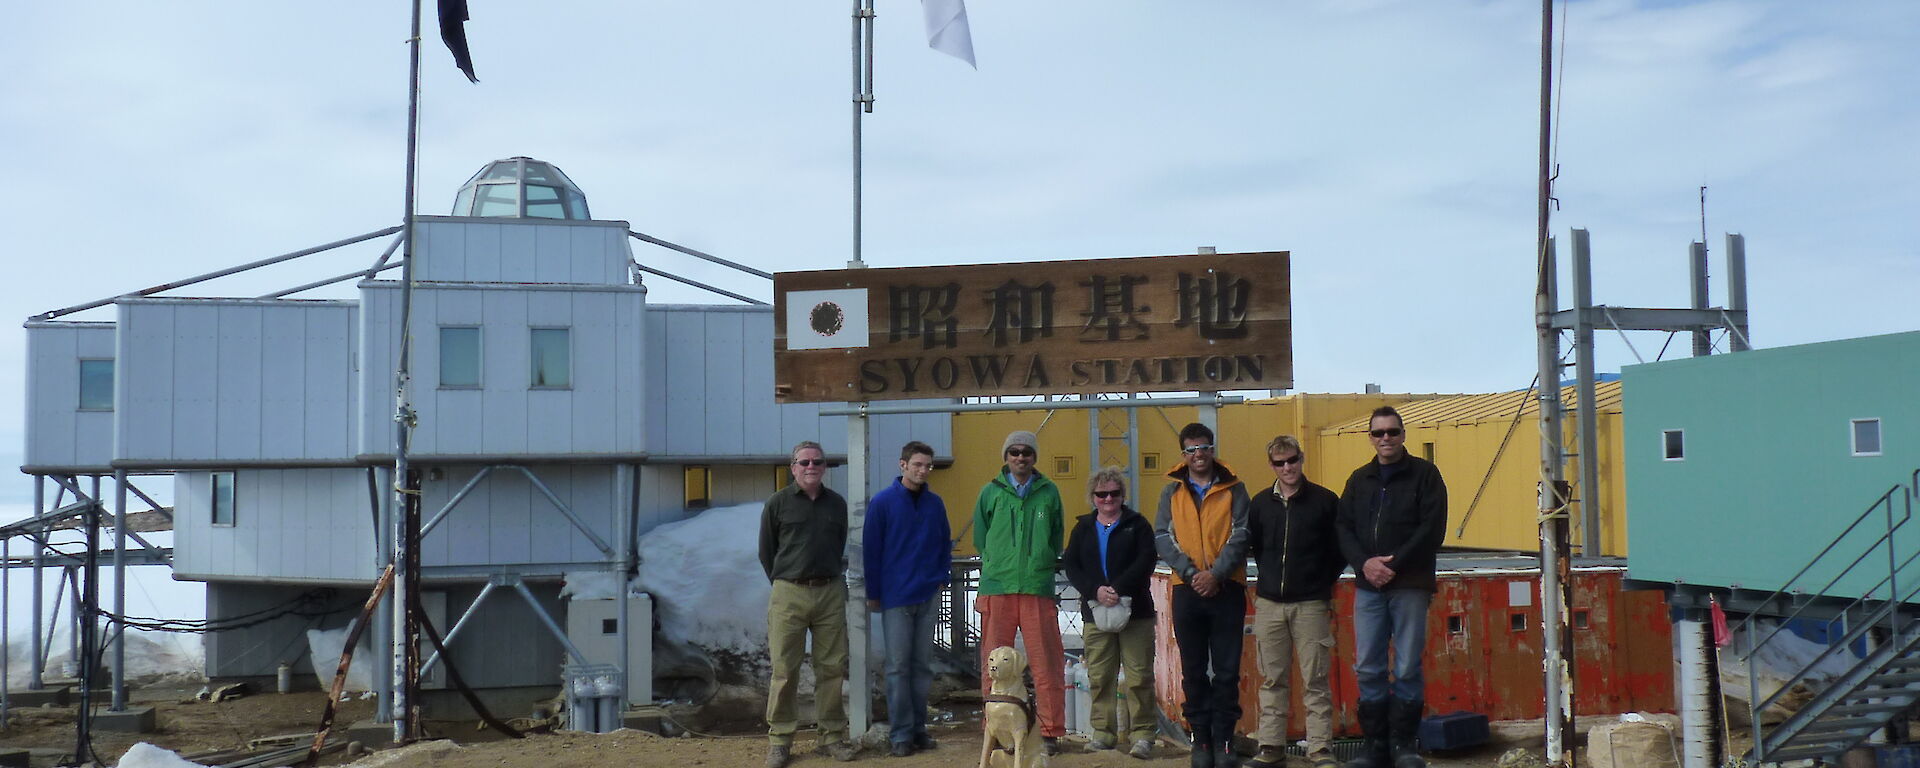 The inspection party, flight crew and Syowa Station Leader outside Syowa station.